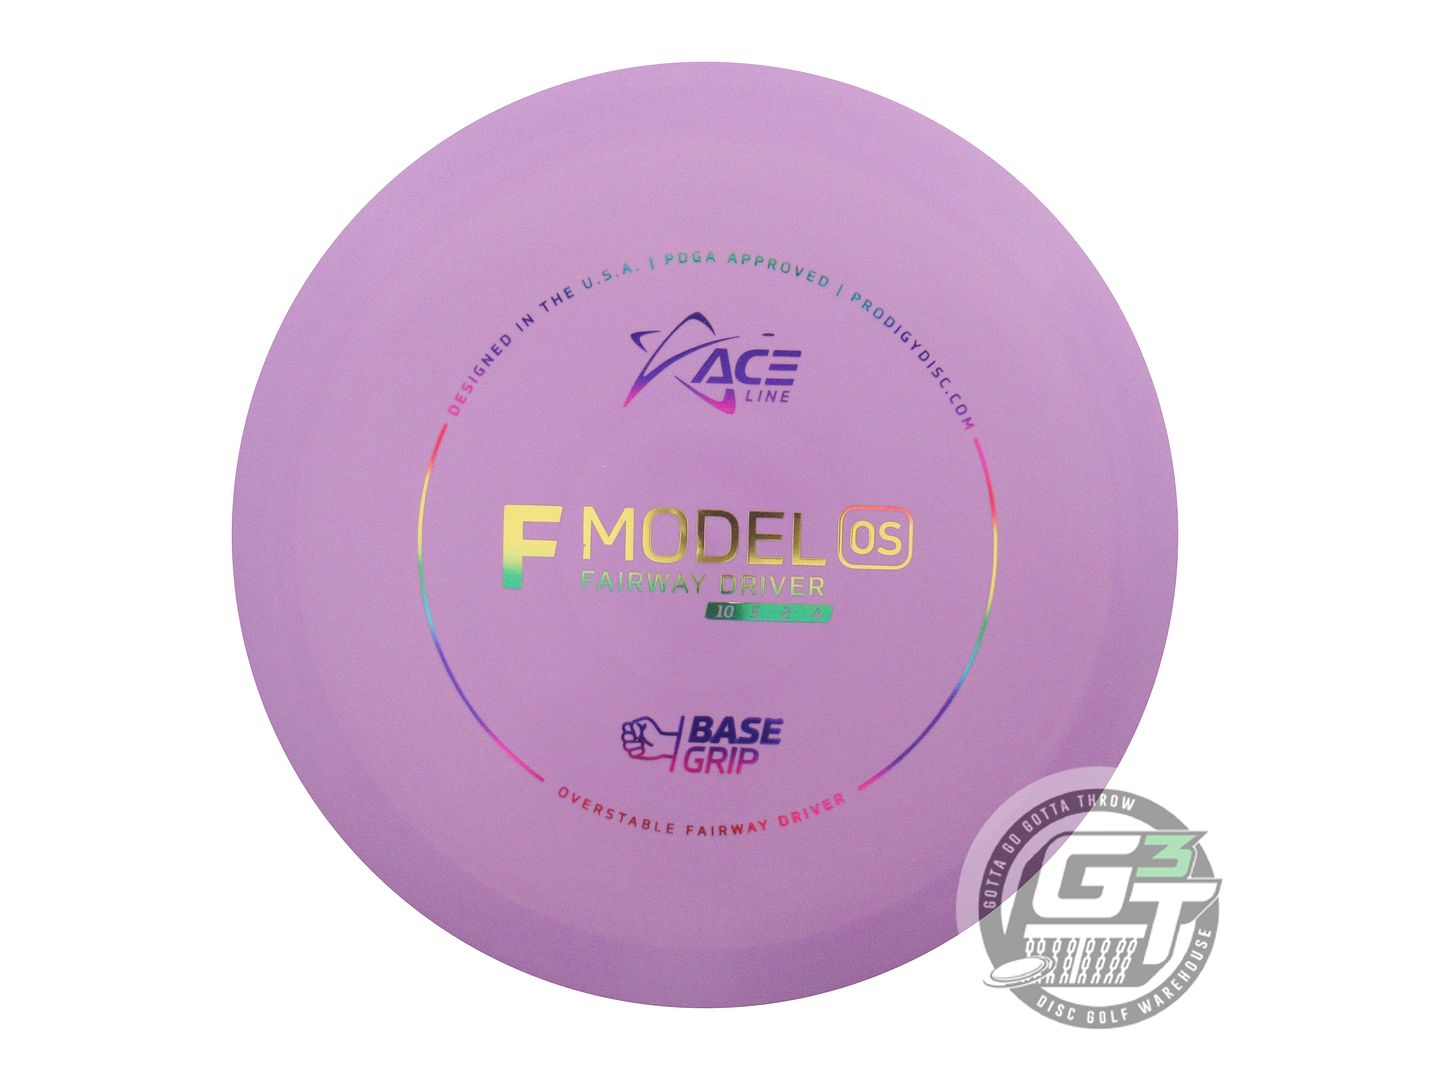 Prodigy Ace Line Base Grip F Model OS Fairway Driver Golf Disc (Individually Listed)